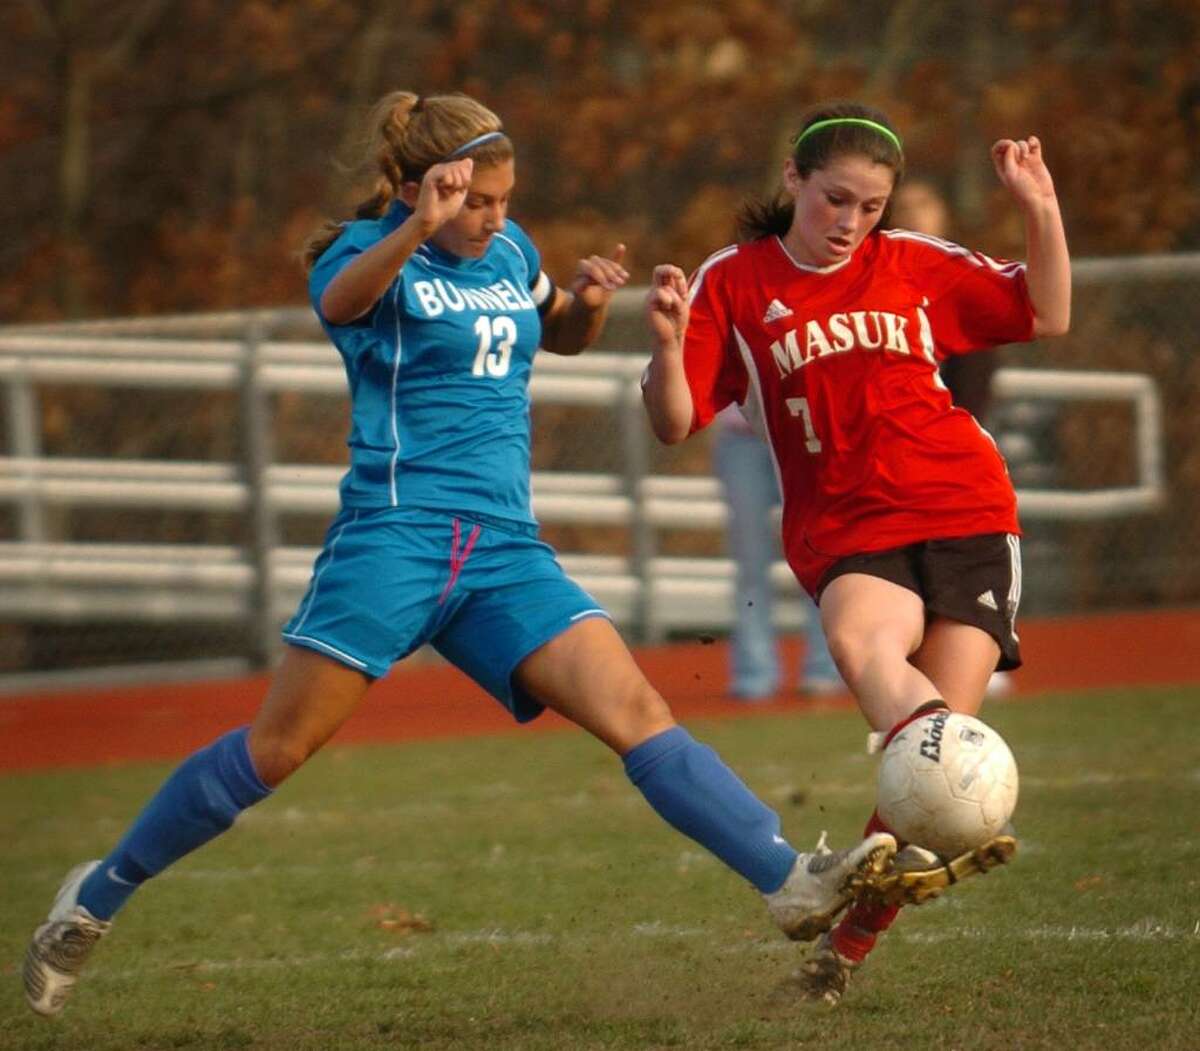 Bunnell's Bridgette Dolio, left, and Masuk's Aislinn McKeown converge on the ball during Monday's matchup in the opening round of the Class L state playoffs.